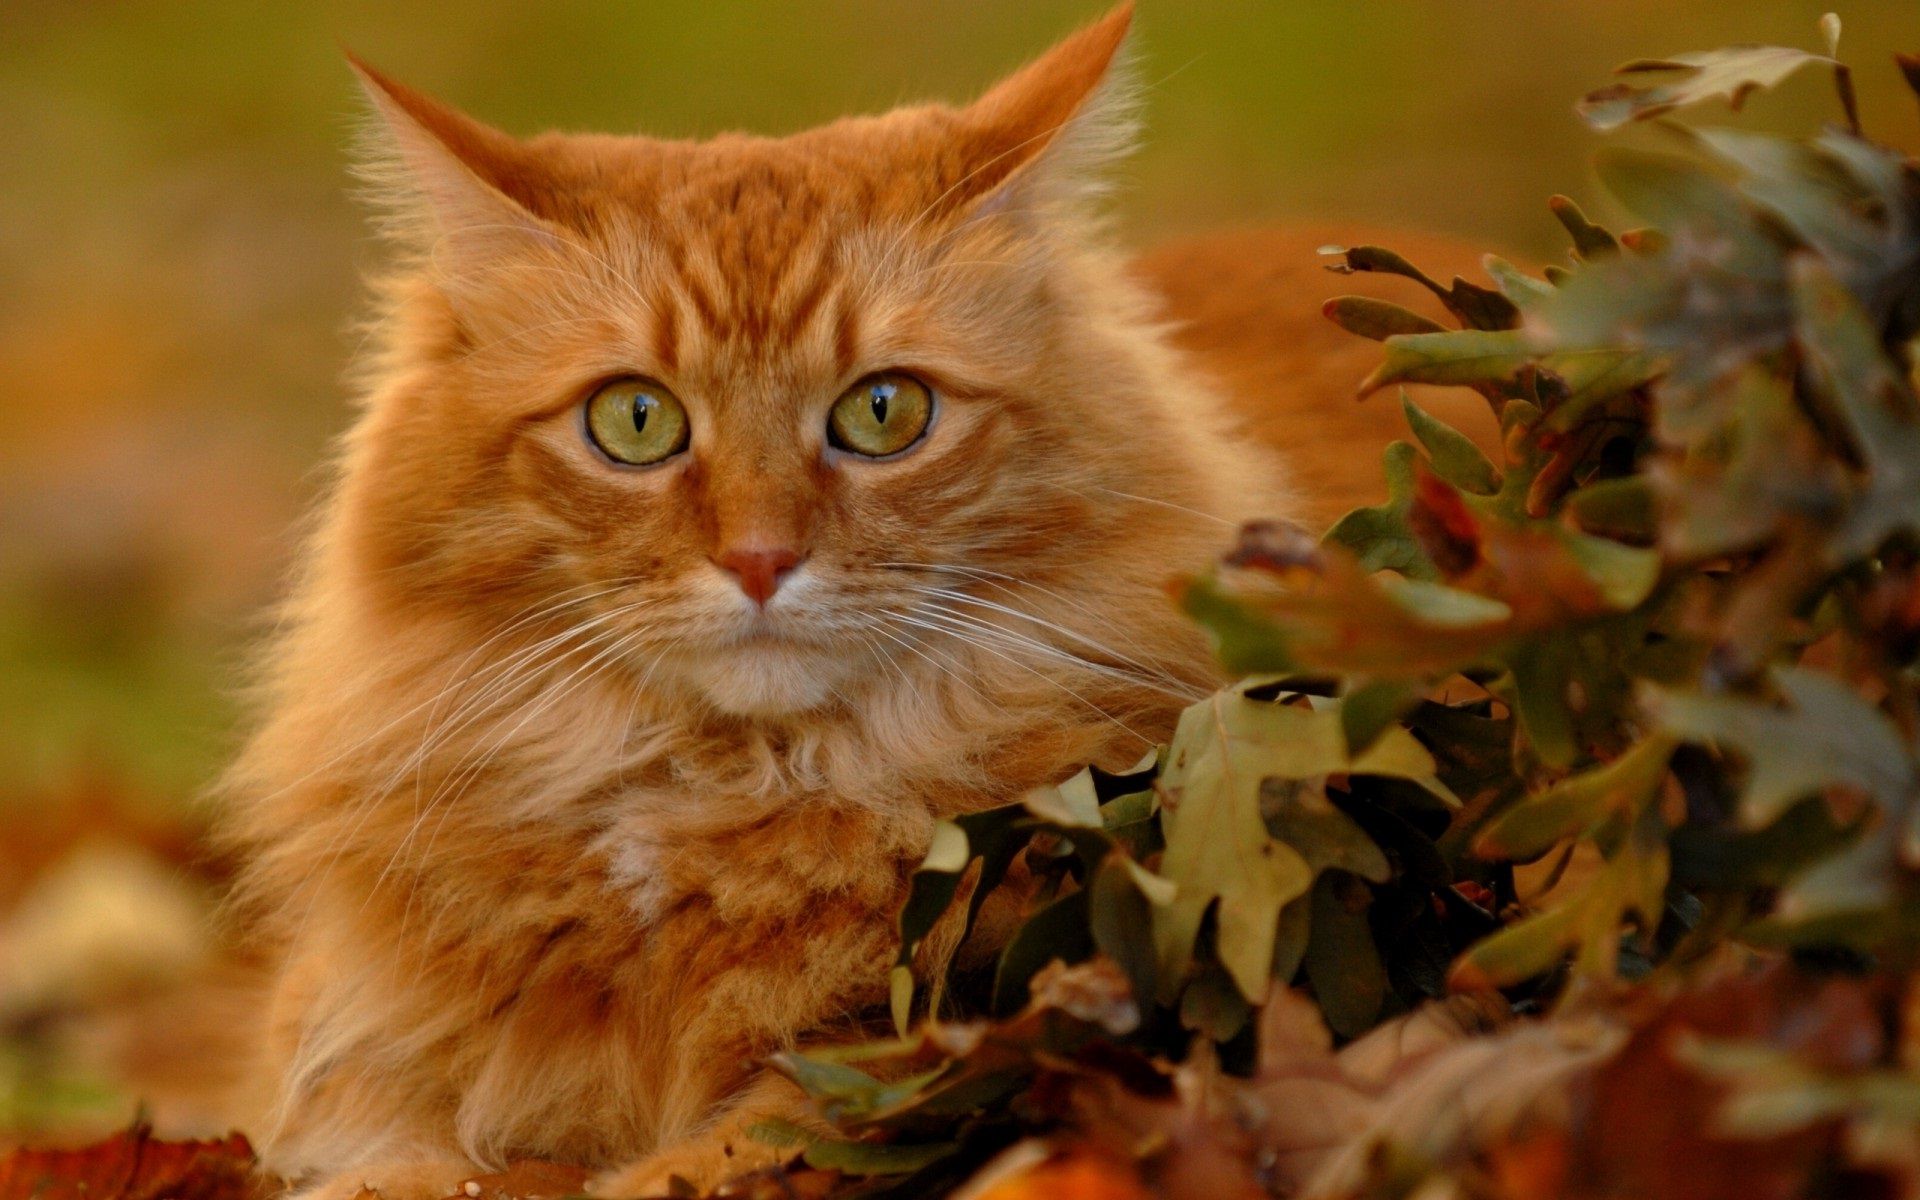 Hd Wallpaper With An Orange Cat With Green Eyes And Autumn Leaves. Cute Animals, Cute Cats Photo, Animals